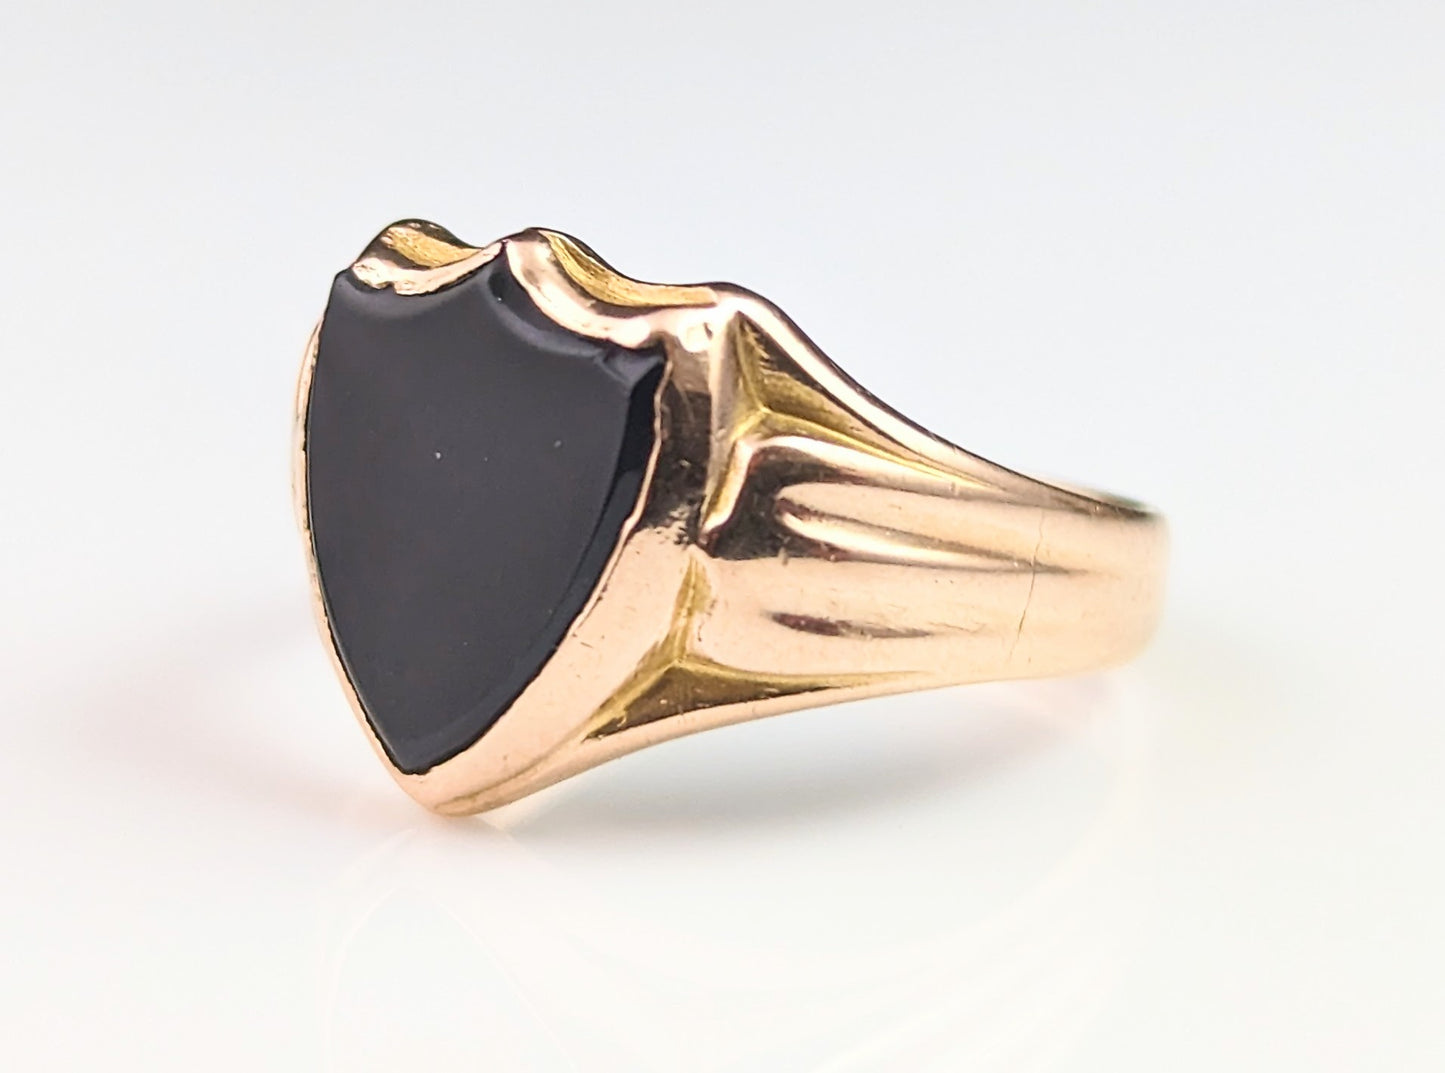 Antique 15ct Rose gold and Onyx signet ring, Shield shaped, pinky, Victorian